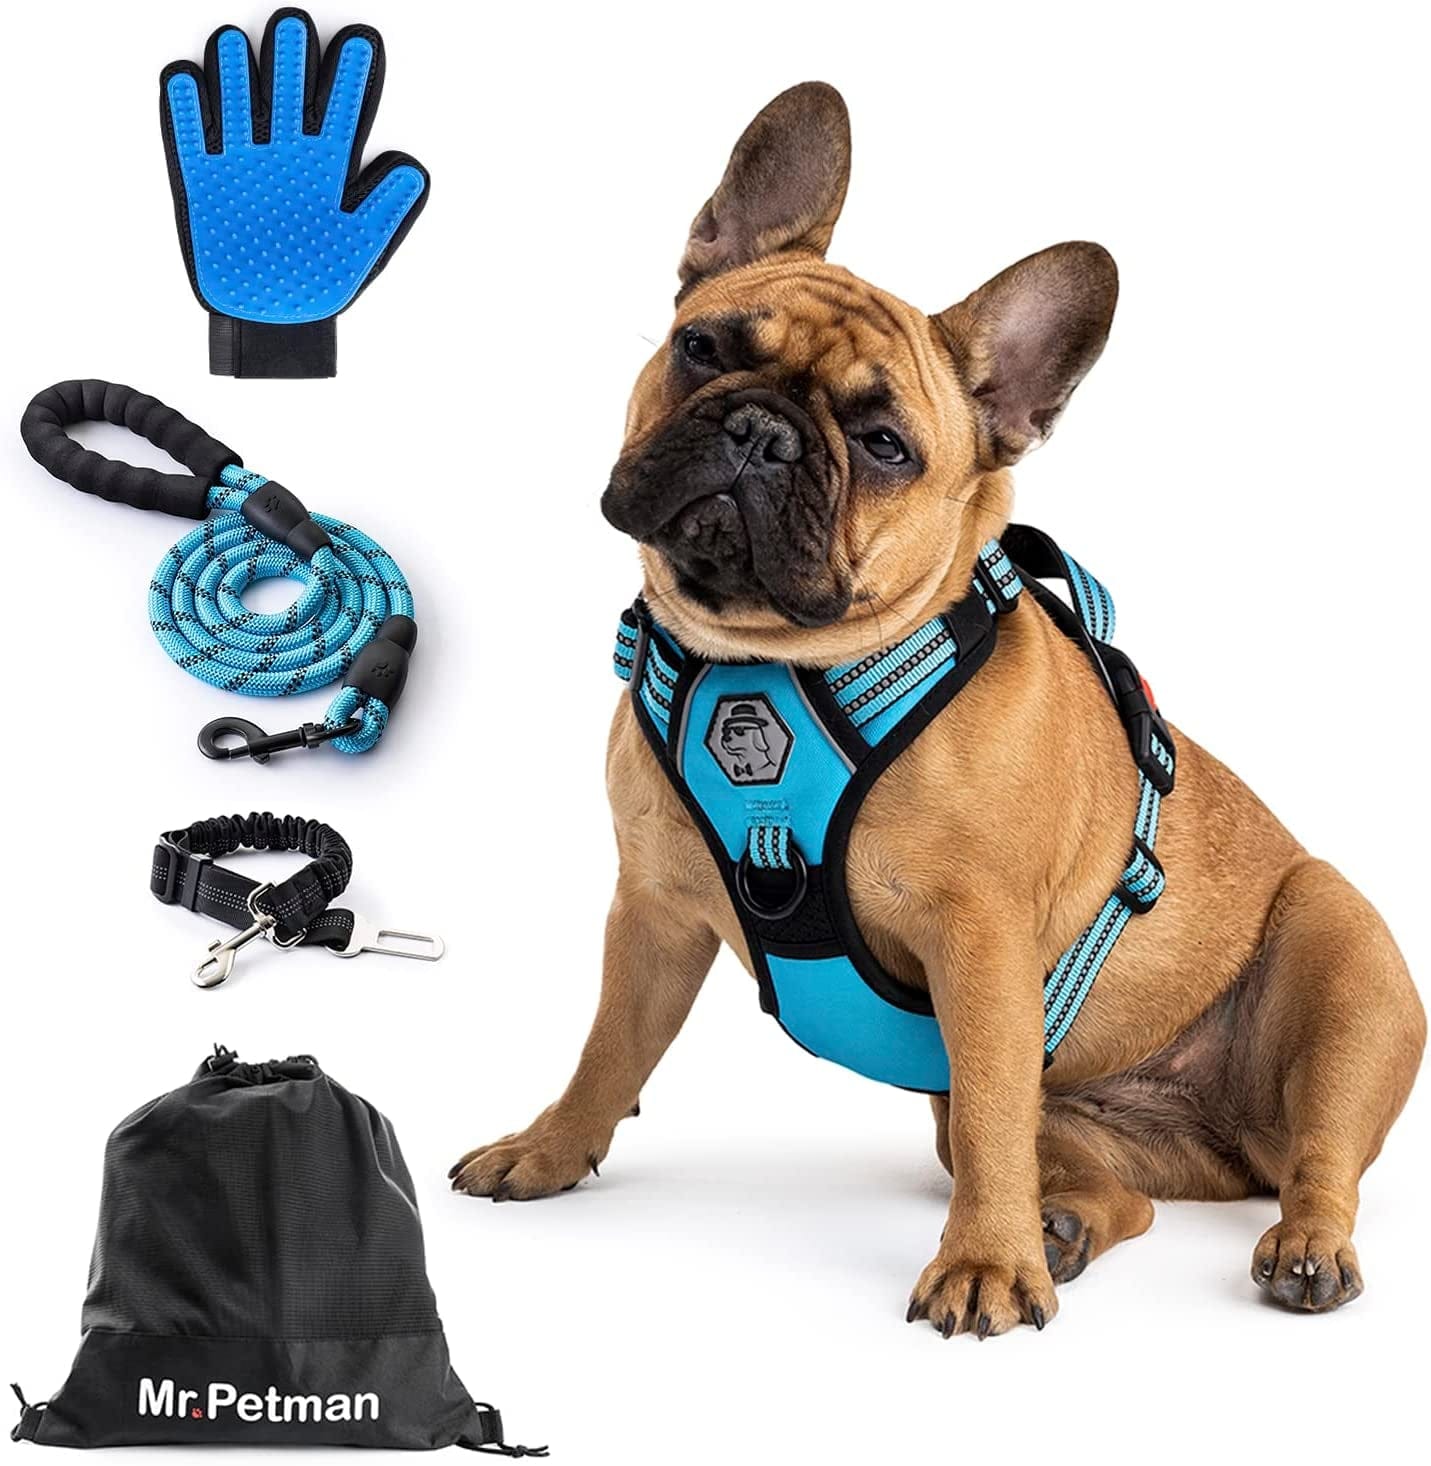 MR. PETMAN No Pull Dog Harness with Leash, Seat Belt, Grooming Glove - No Choke Dog Harness Set for Small Medium Large Dogs- Reflective Adjustable Dog Vest Harnesses with Handle for Walking Training Animals & Pet Supplies > Pet Supplies > Dog Supplies > Dog Apparel Mr. Petman Sky Blue Medium 